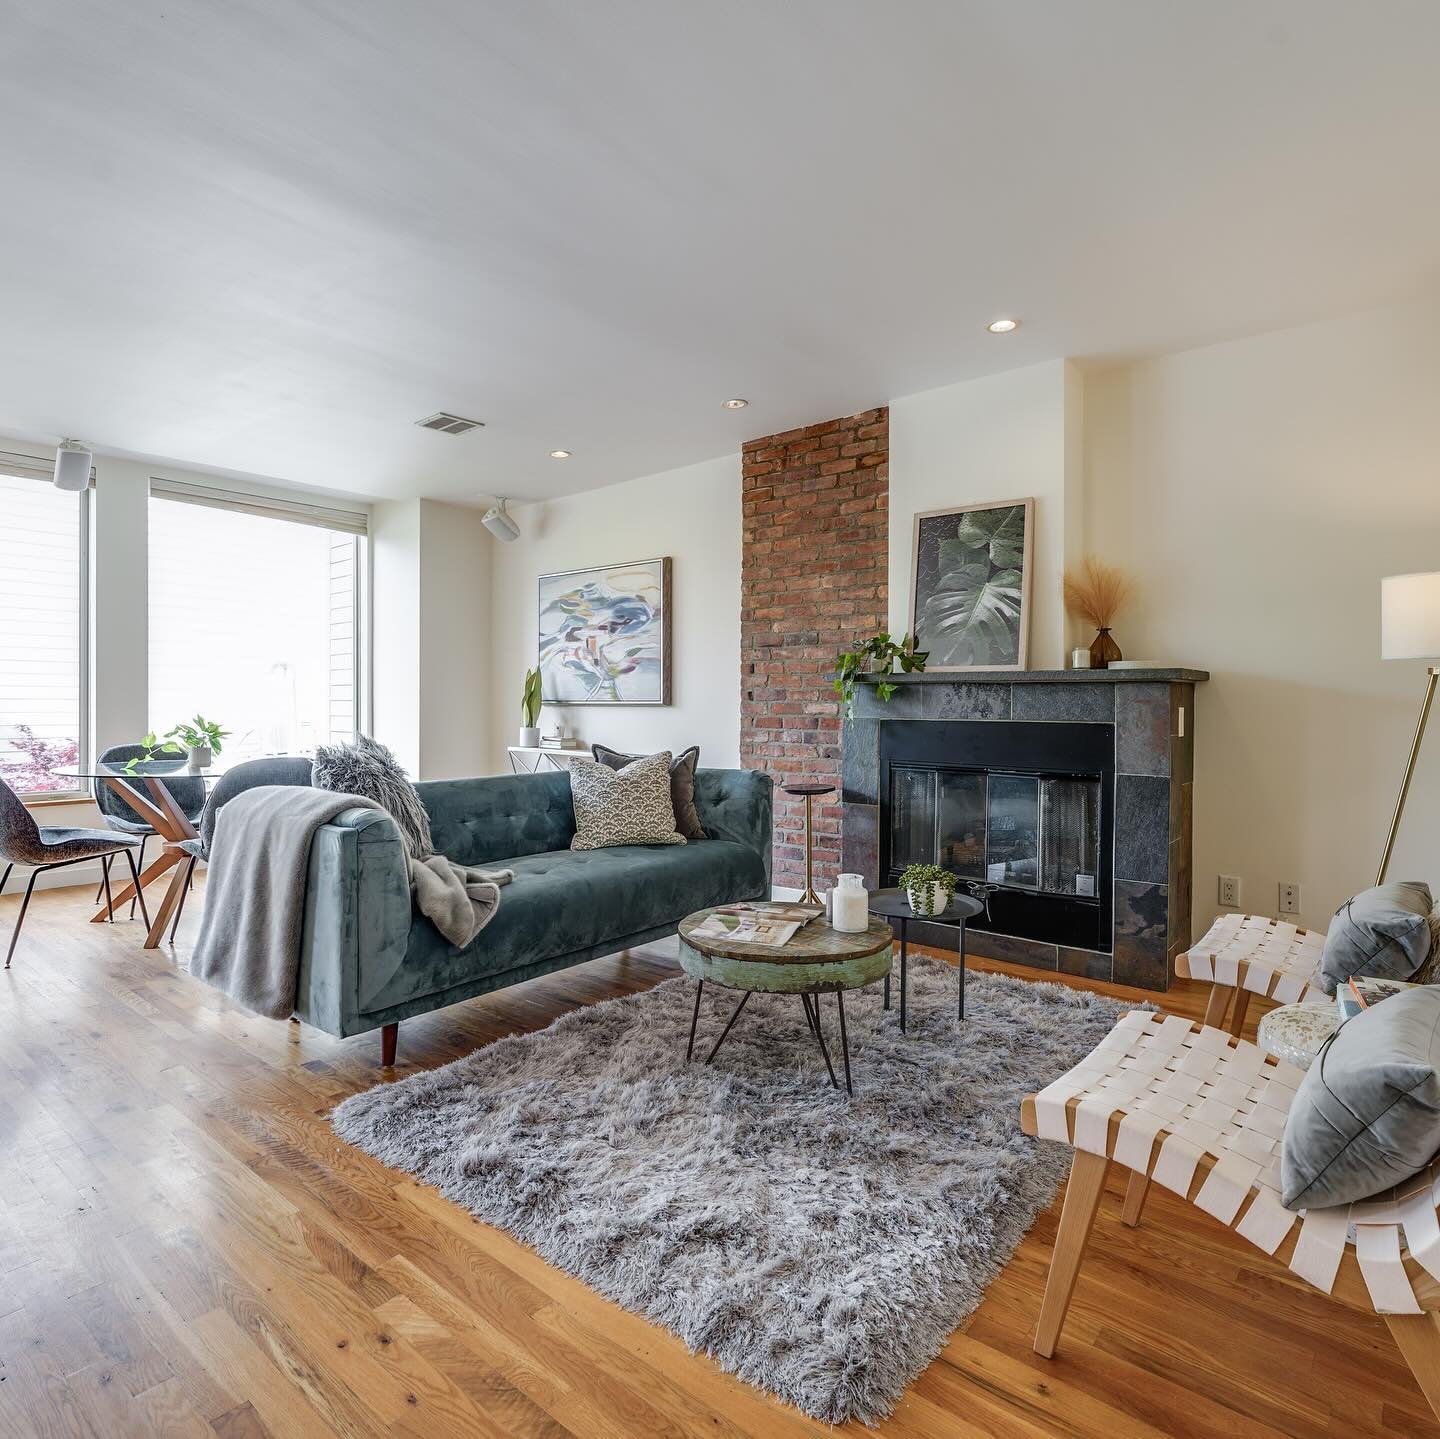 2 bed 🛌 1 bath 🛁 with a PRIVATE BACKYARD in&hellip;

Downtown Jersey City!

🏡 360 7th Street 2, Jersey City

Step inside and experience the spacious layout with modern, renovated, open kitchen and living area, plenty of room for living and dining 